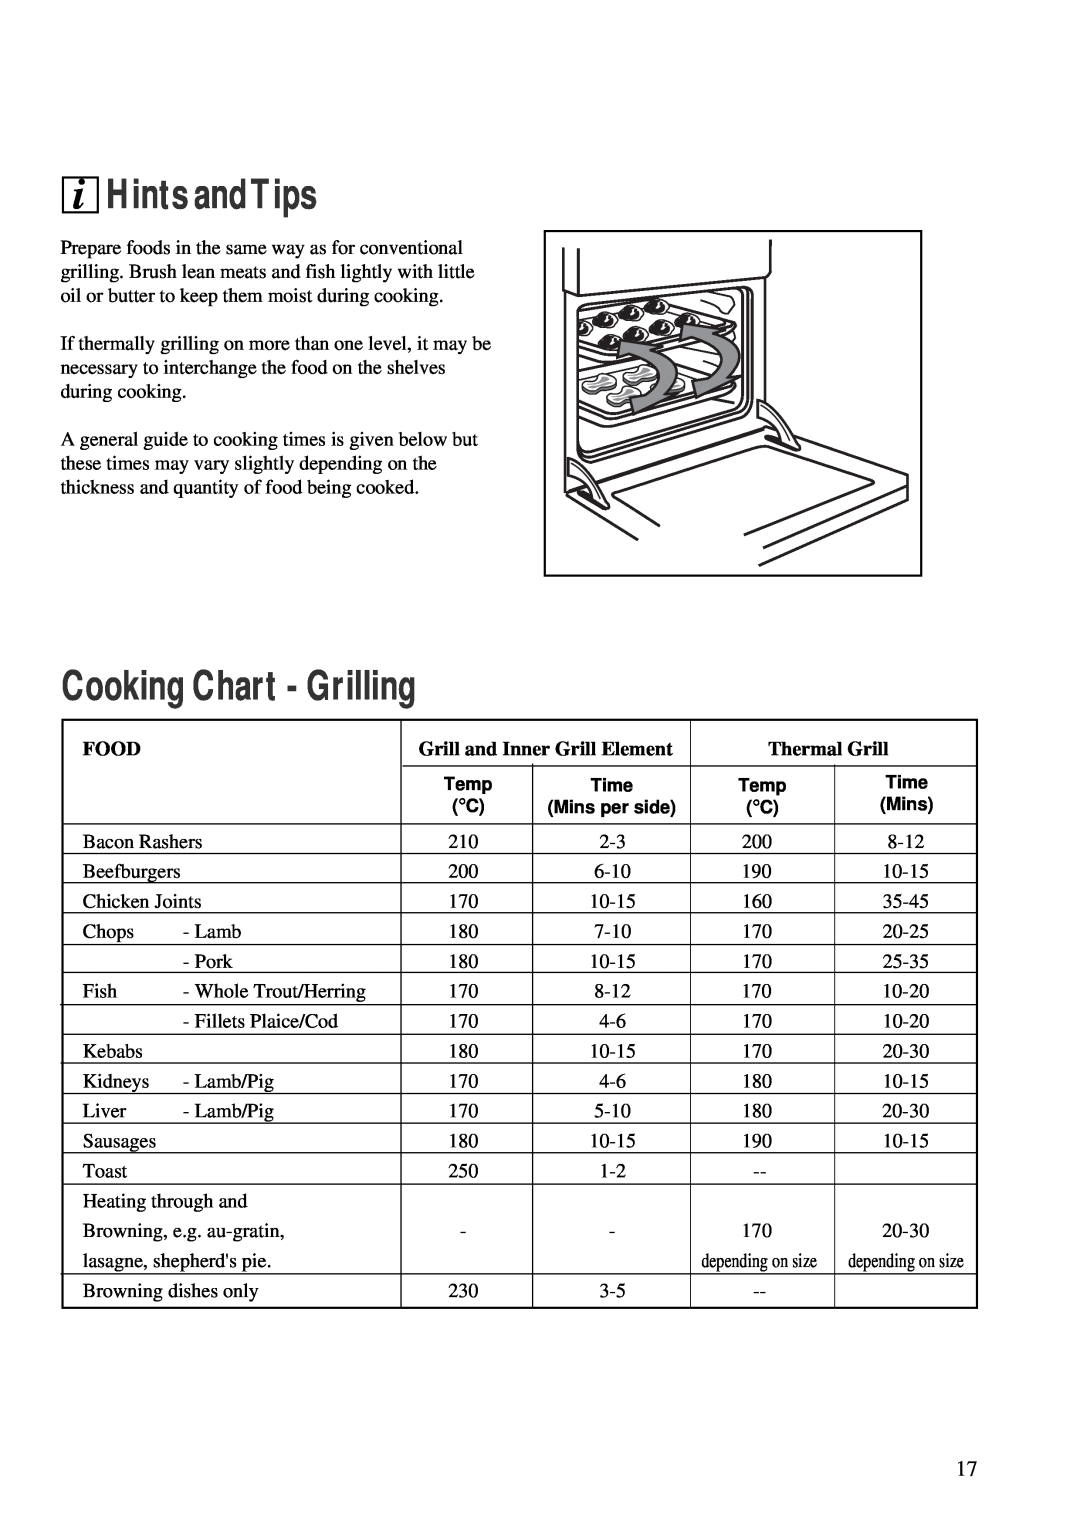 Tricity Bendix TBS 605 manual Cooking Chart - Grilling, Hints andTips, Food, Grill and Inner Grill Element, Thermal Grill 